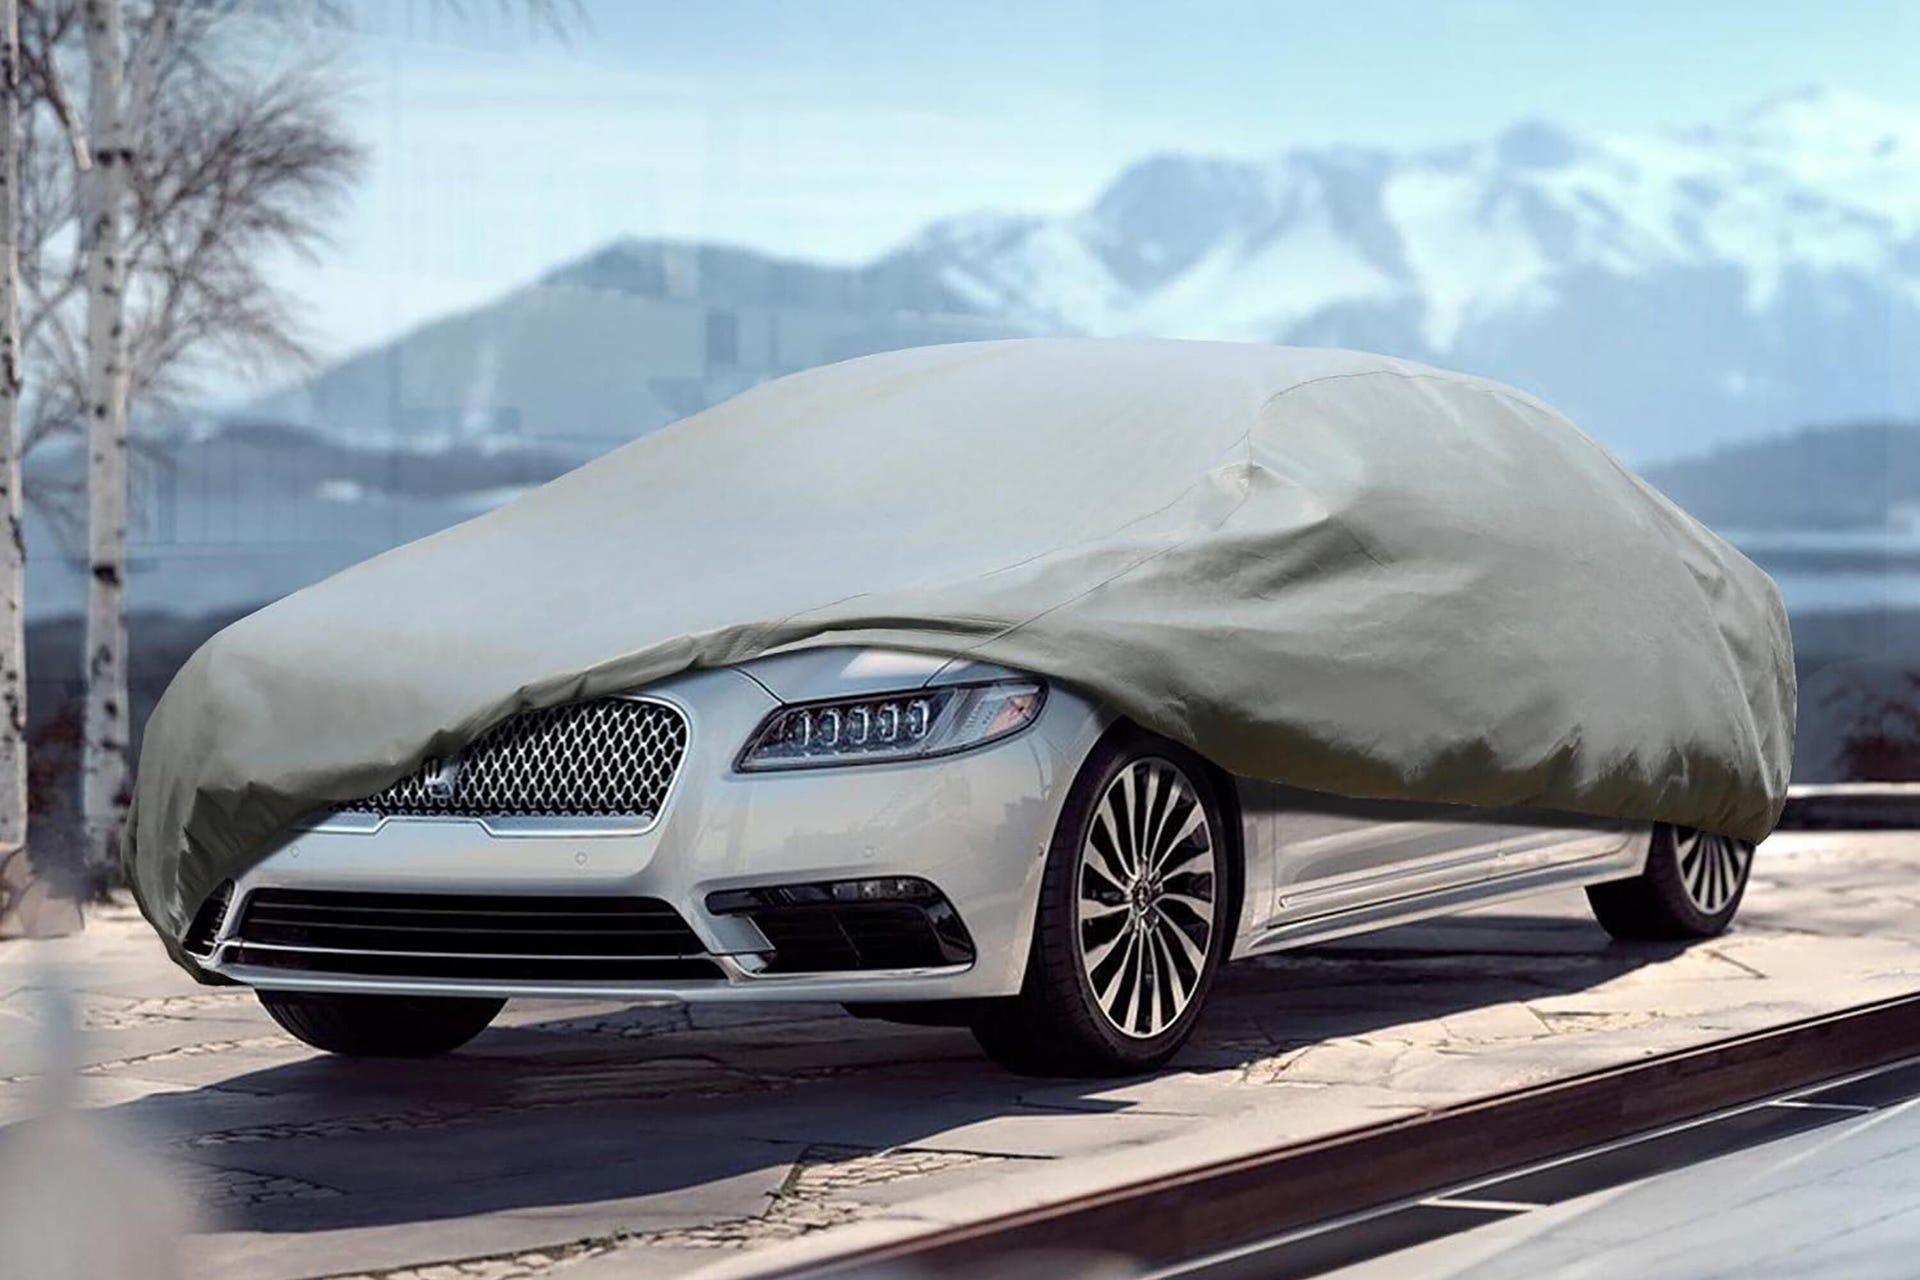 A car partially covered by a car cover